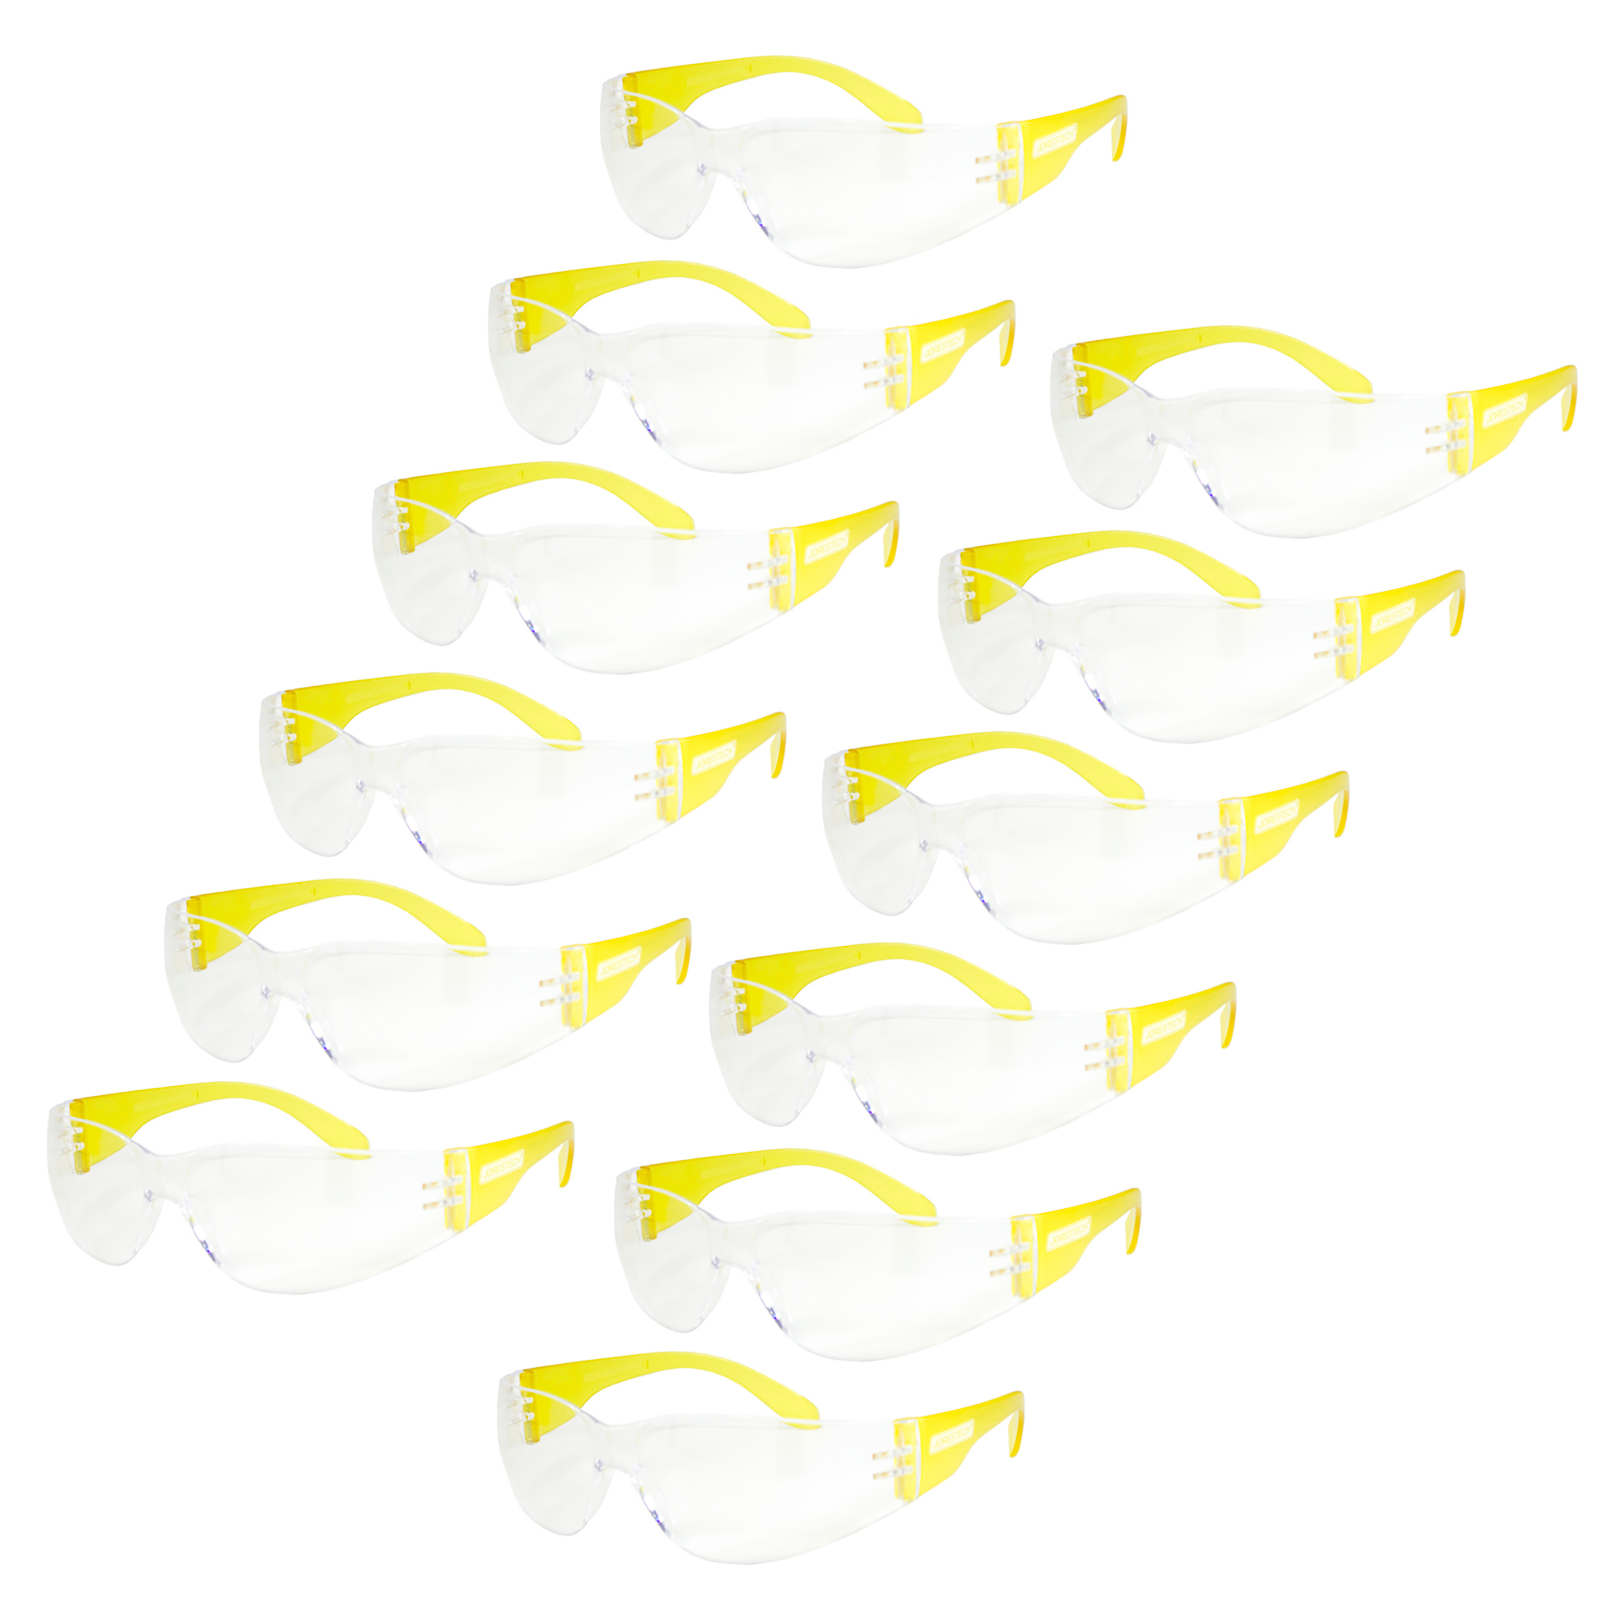 12 clear lens and yellow temple  JORESTECH ANSI compliant safety glasses for high impact protection built with polycarbonate for durability